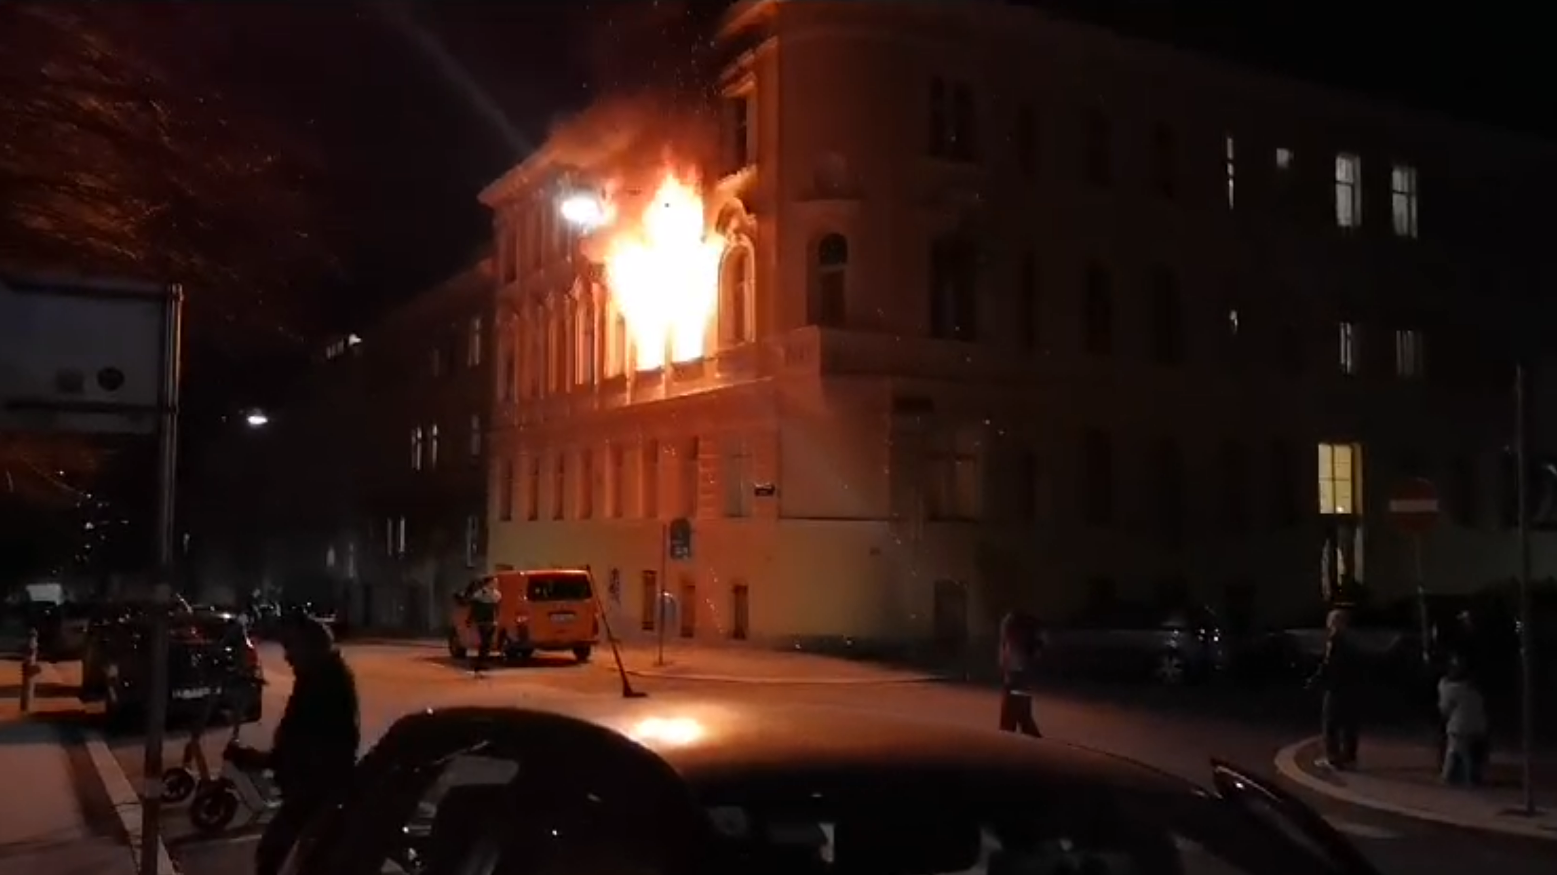 Major operation in Meidling - an apartment is on fire. (Bild: zVg)